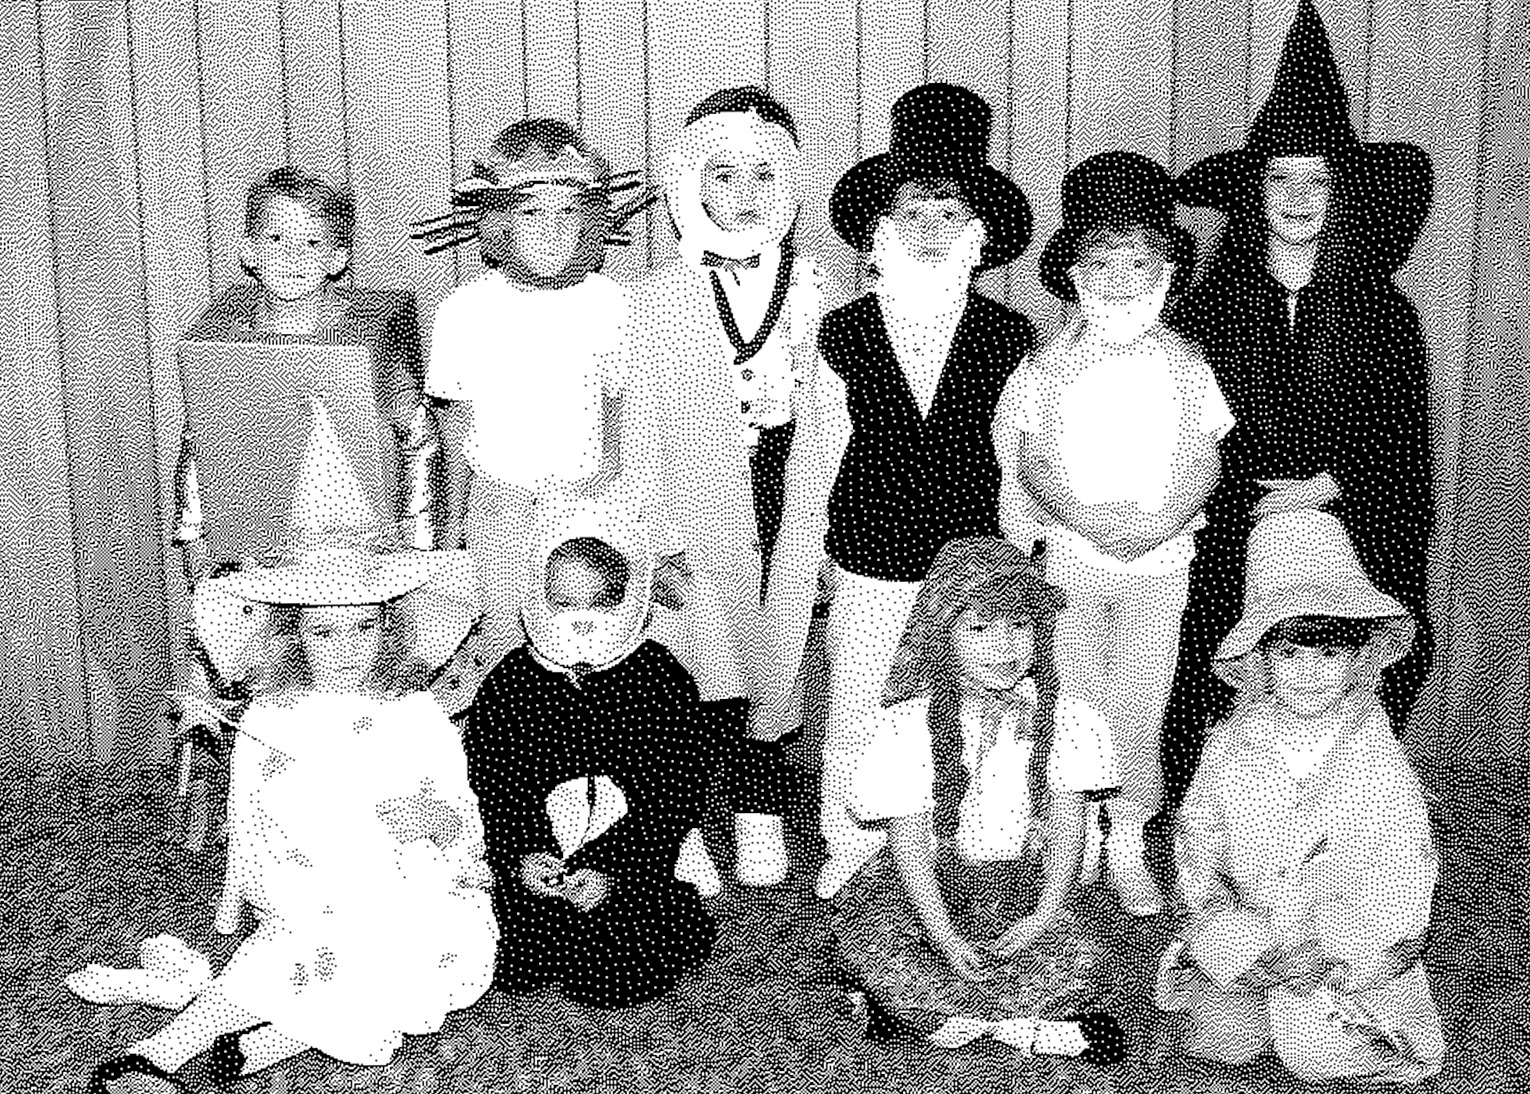 THE PRECIOUS KIDS PRESCHOOL (five year olds) who attended the two-day a week school in 1991 included (front row): Brett Schlaegel, Miranda Hollern, Ashley Van Eaton, Amber Kollman; (back row) Justin Nelson, Tyler Nelson, Ty Brown, Danielle Beuogher, Mandy Shephard, and Megan Lingg. They were all dressed up for their program at the Congregational Church.